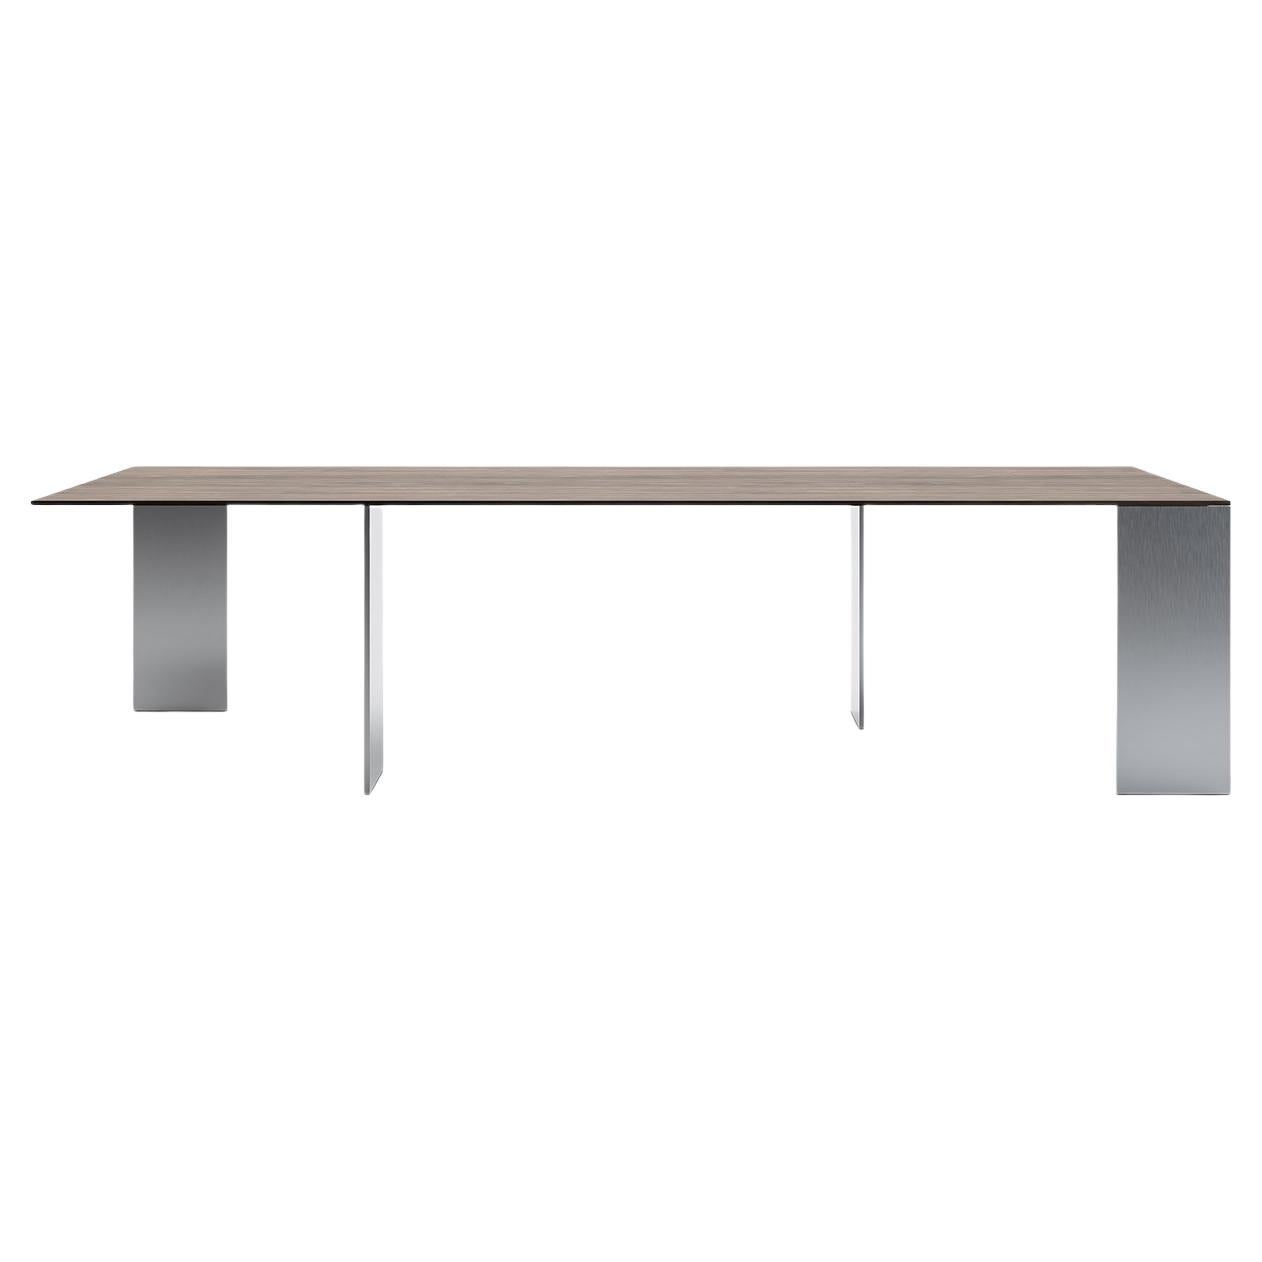 Acerbis Axis Large Table in Eucalyptus Wooden Top with Brushed Steel Frame For Sale